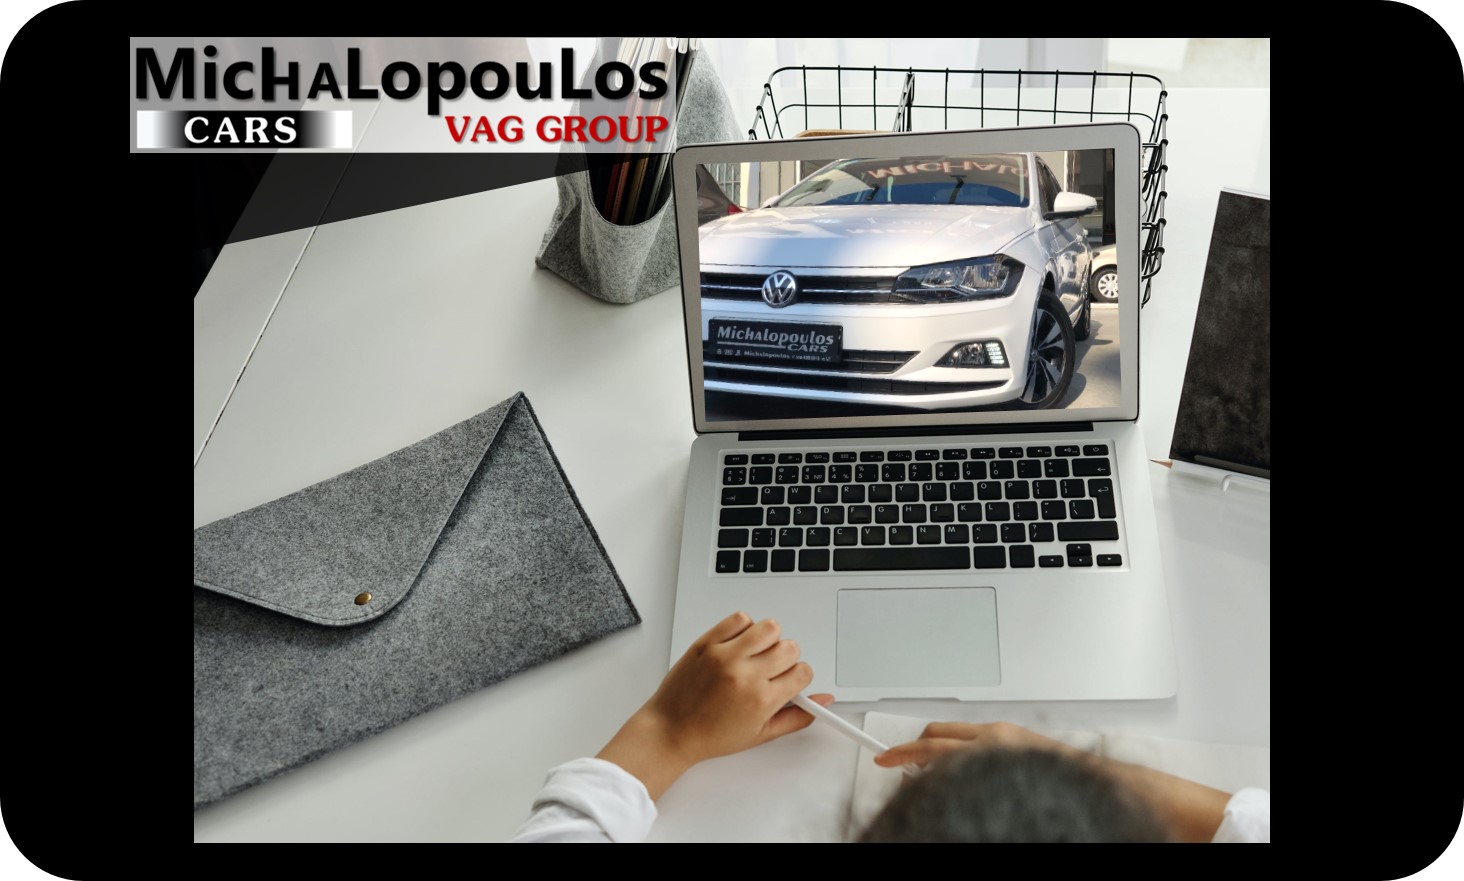 Michalopoulos VAG GROUP CARS LIVE VIDEO